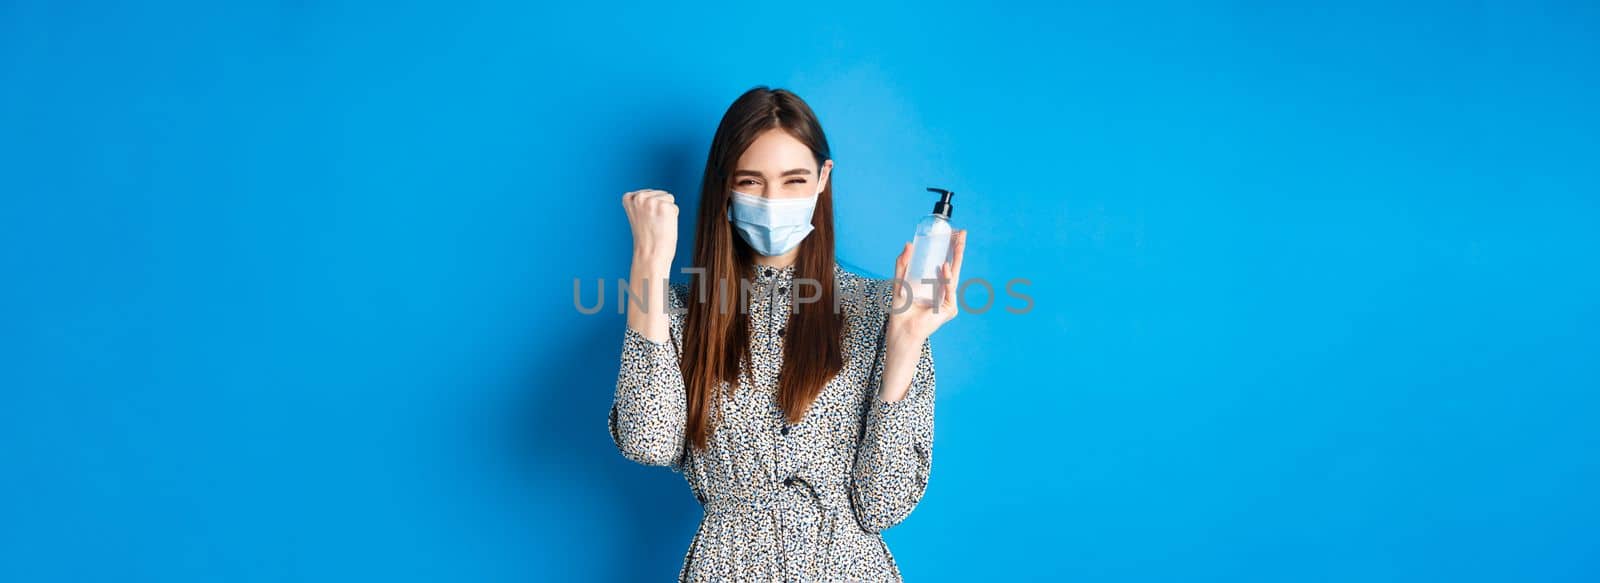 Covid-19, social distancing and healthcare concept. Motivated and excited girl in medical mask cheering, showing bottle of hand sanitizer and say yes, standing on blue background.